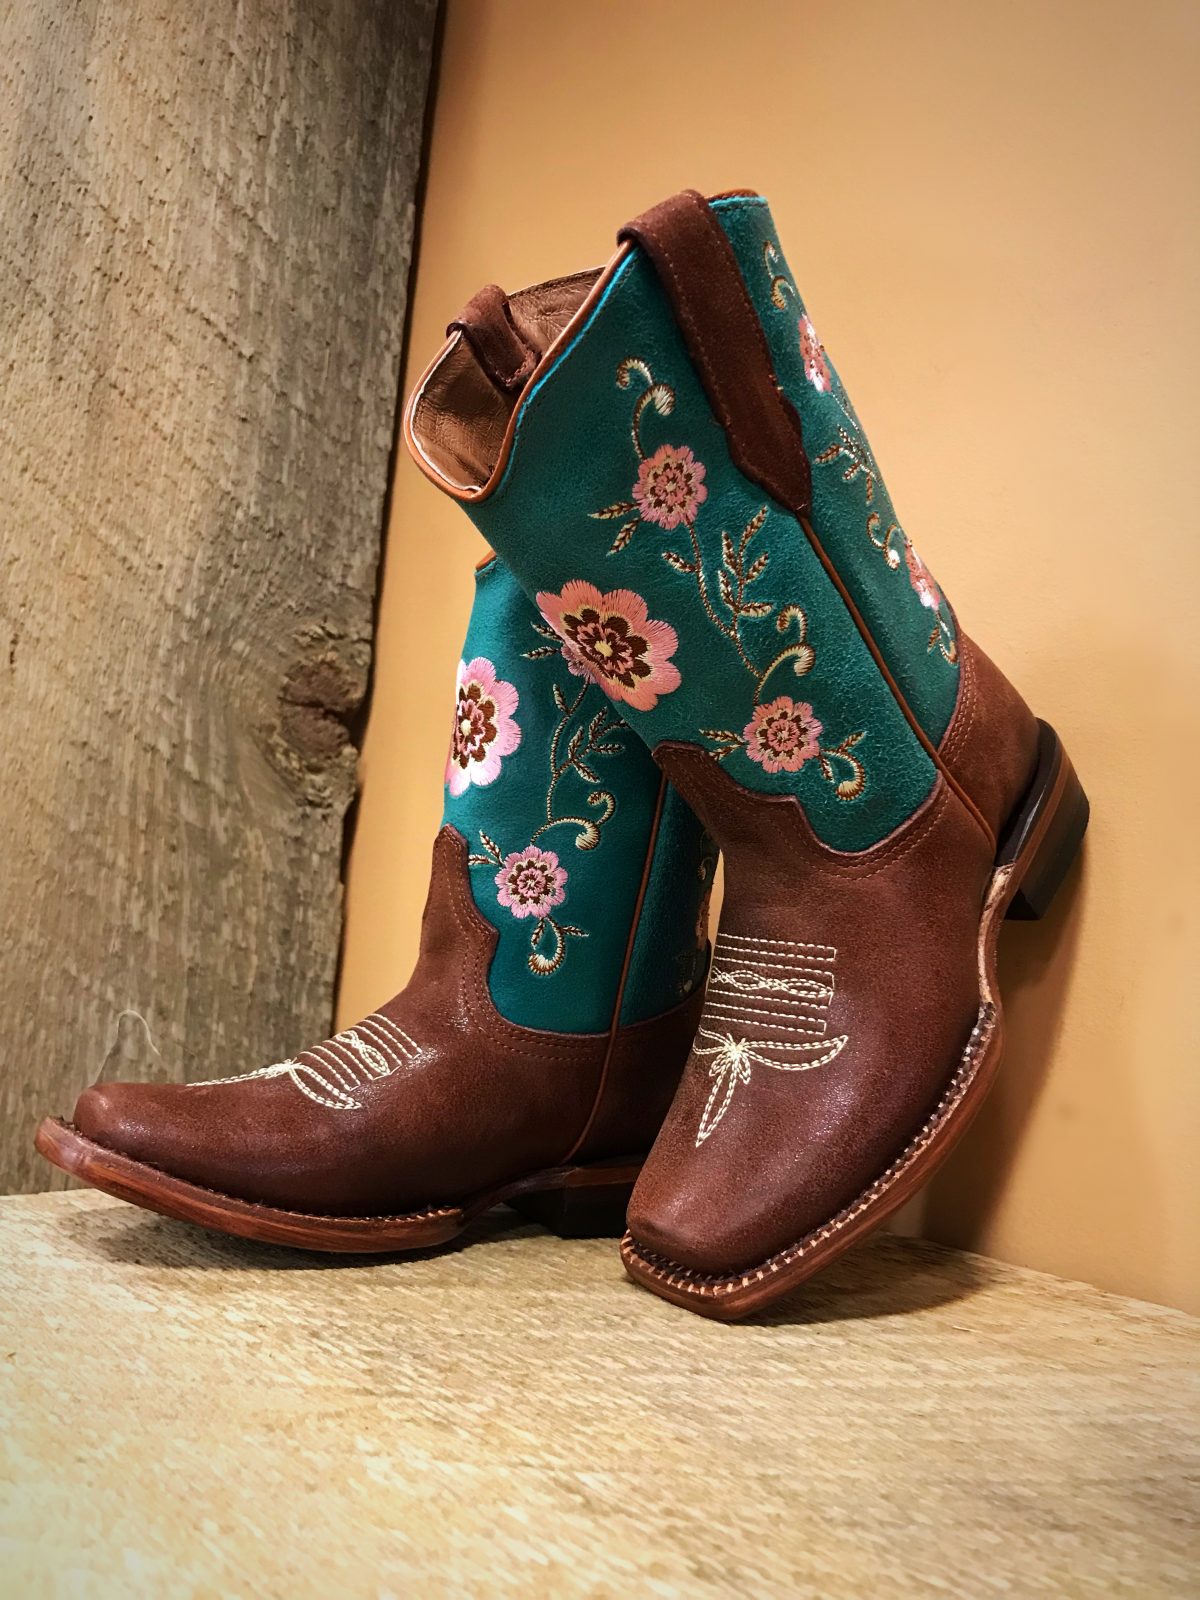 Girls Floral Embroidery Cowgirl Boots ( Shedron ) El Potrerito